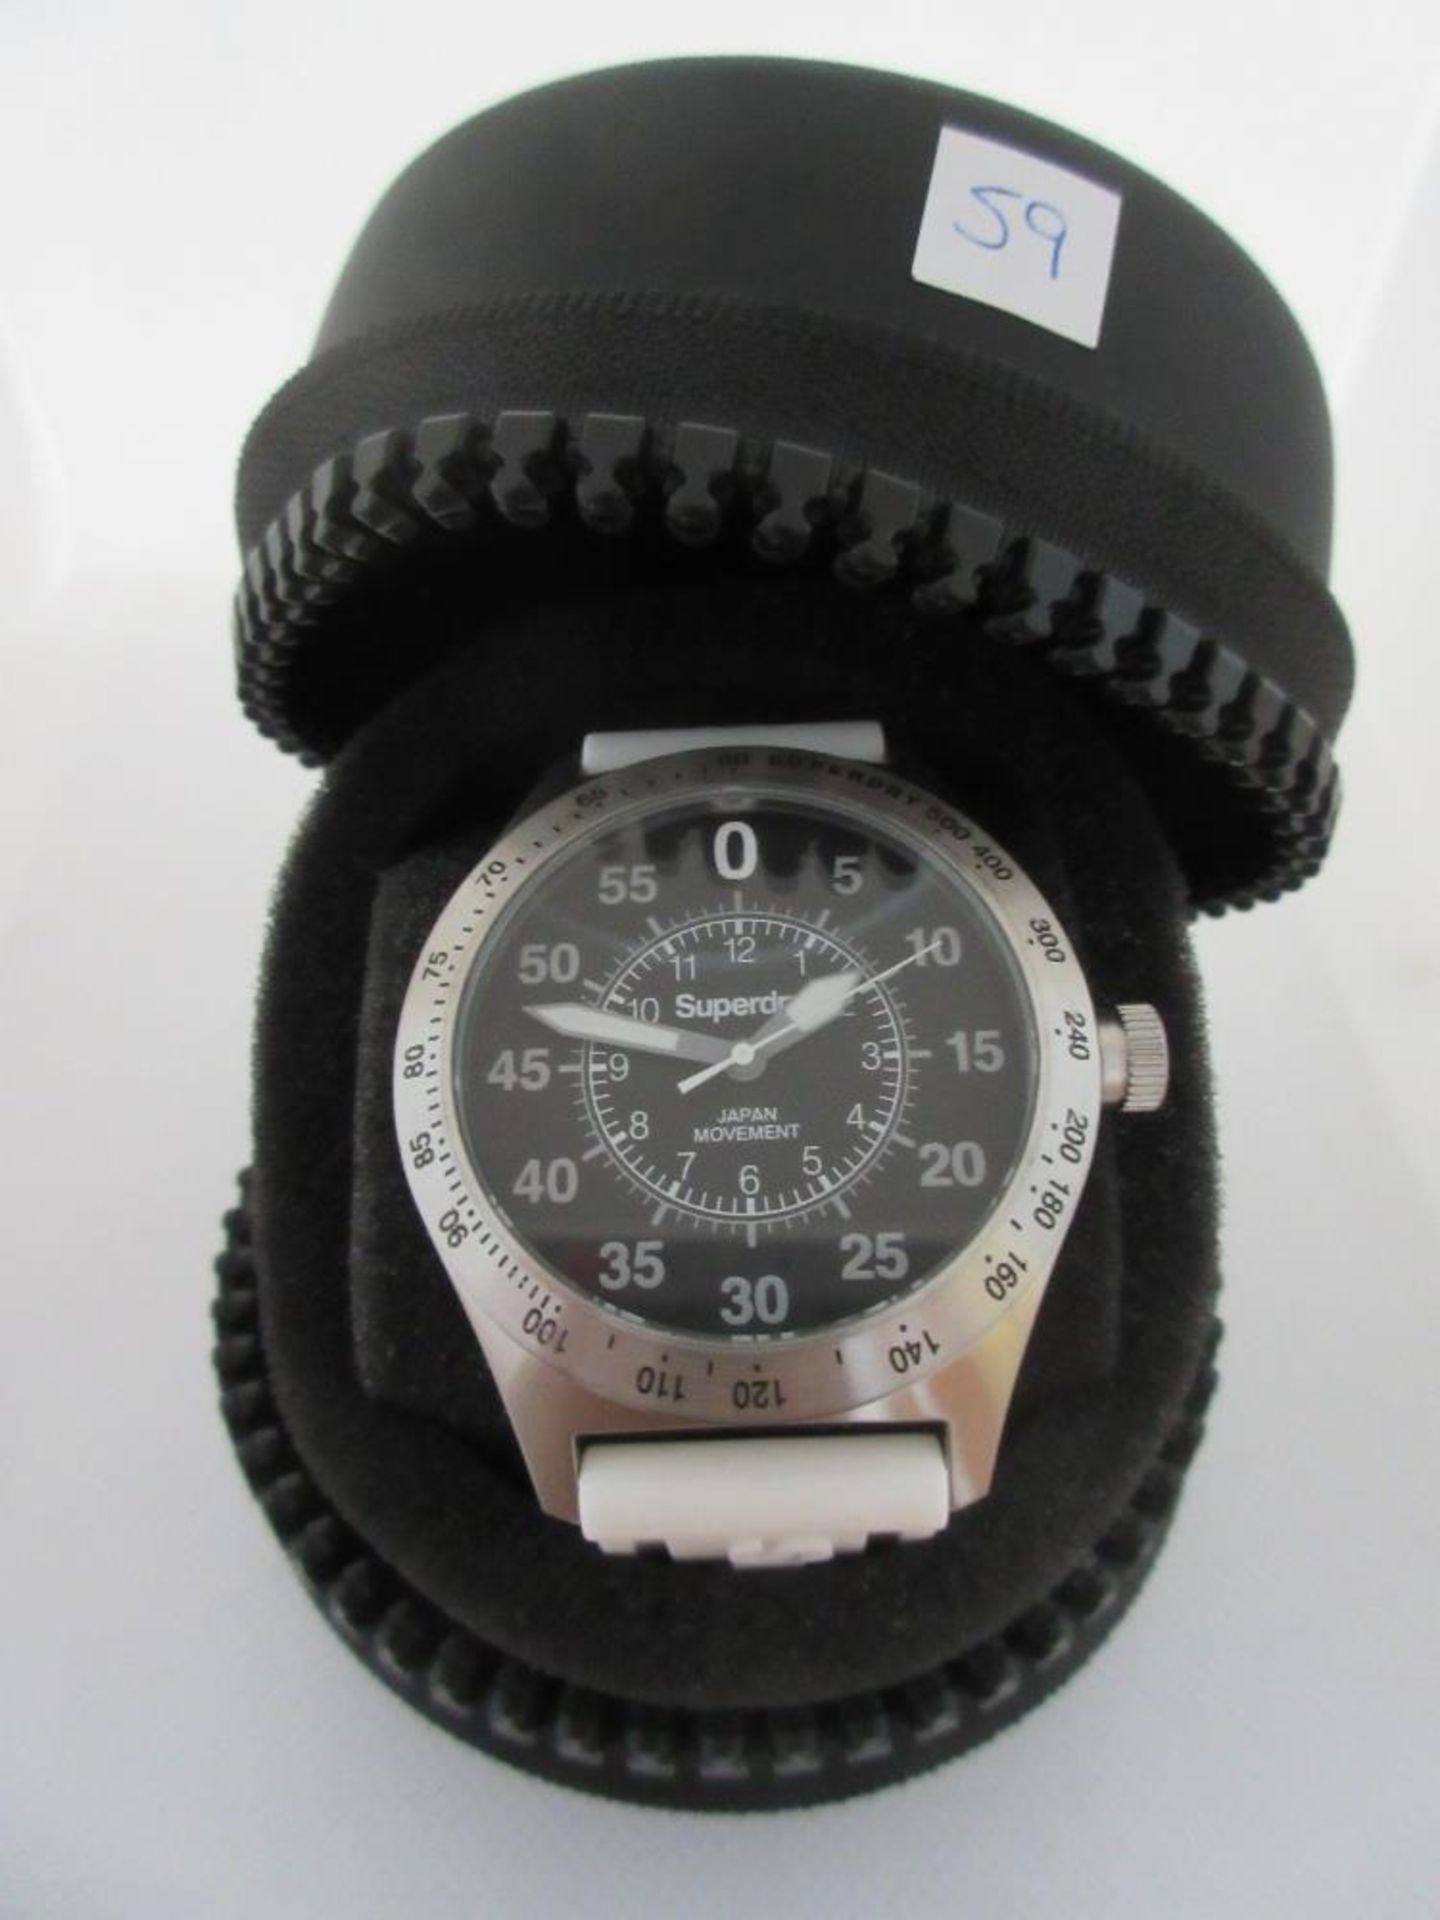 SUPERDRY MALE WATCH, MODEL SYG111W, CASE DIAMETER 45MM, RUBBER STRAP, BOXED, RRP £ 79.99